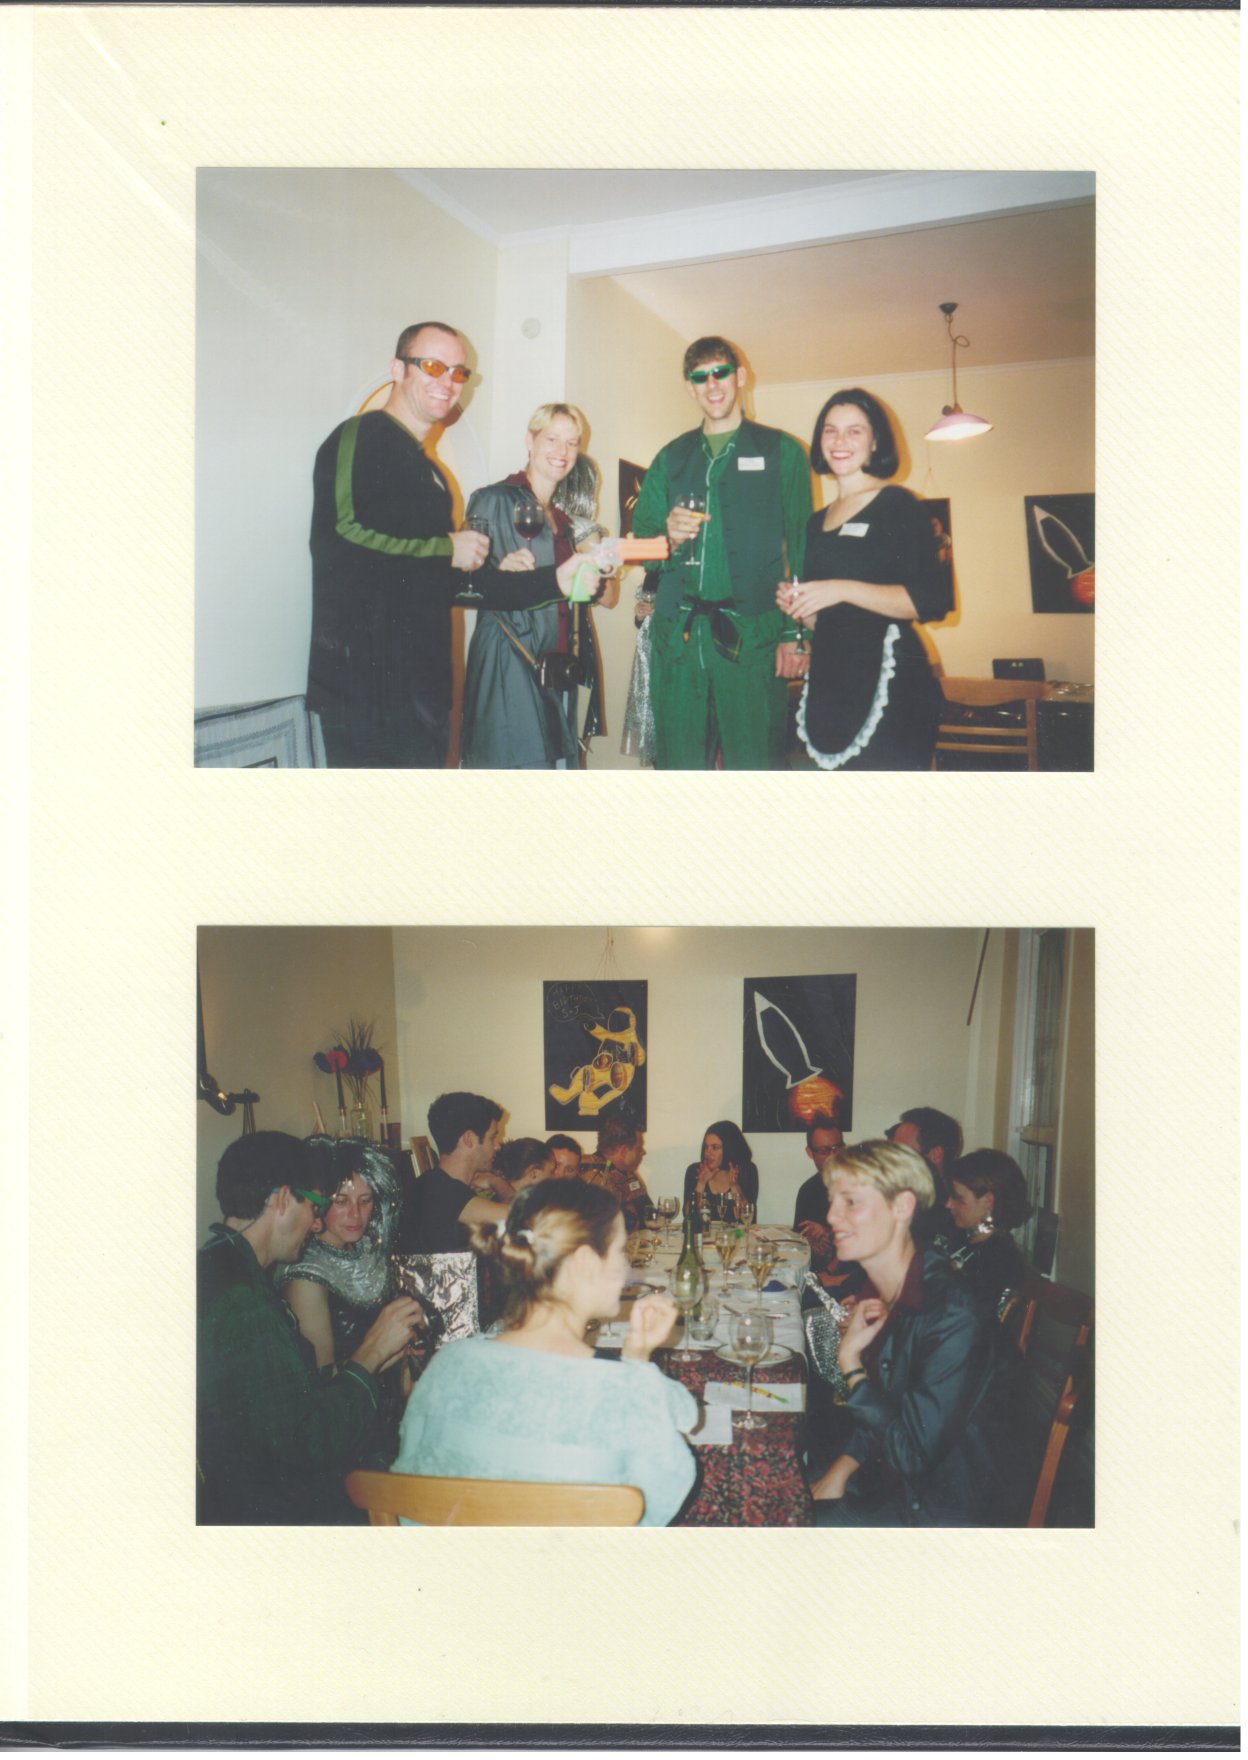 Sci-fi party photo